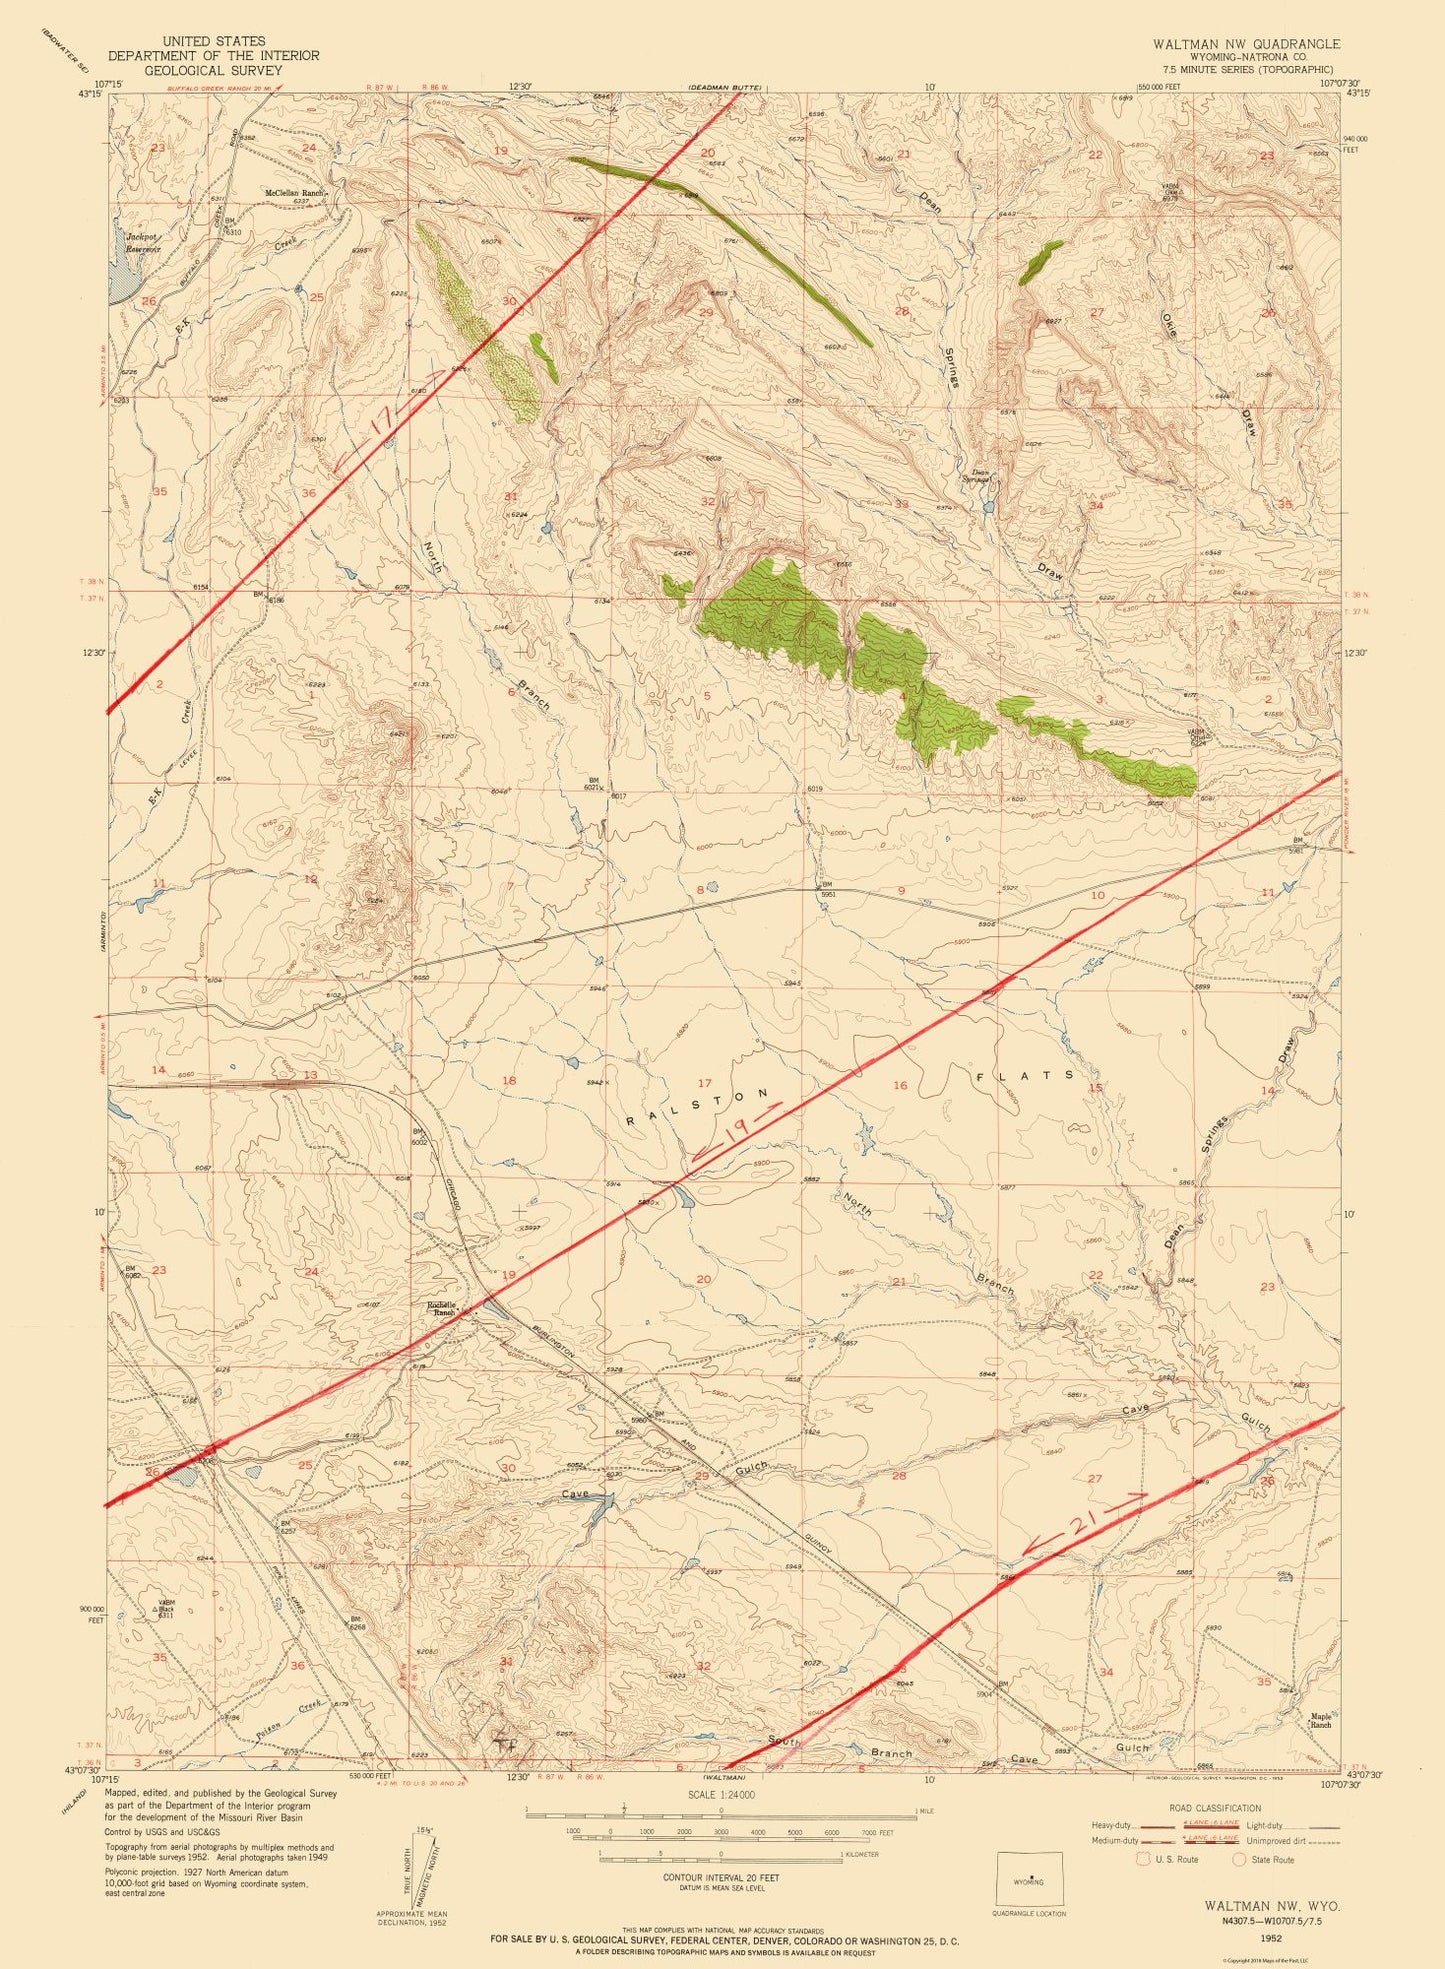 Topographical Map - Waltman Wyoming Quad - USGS 1952 - 23 x 31.34 - Vintage Wall Art